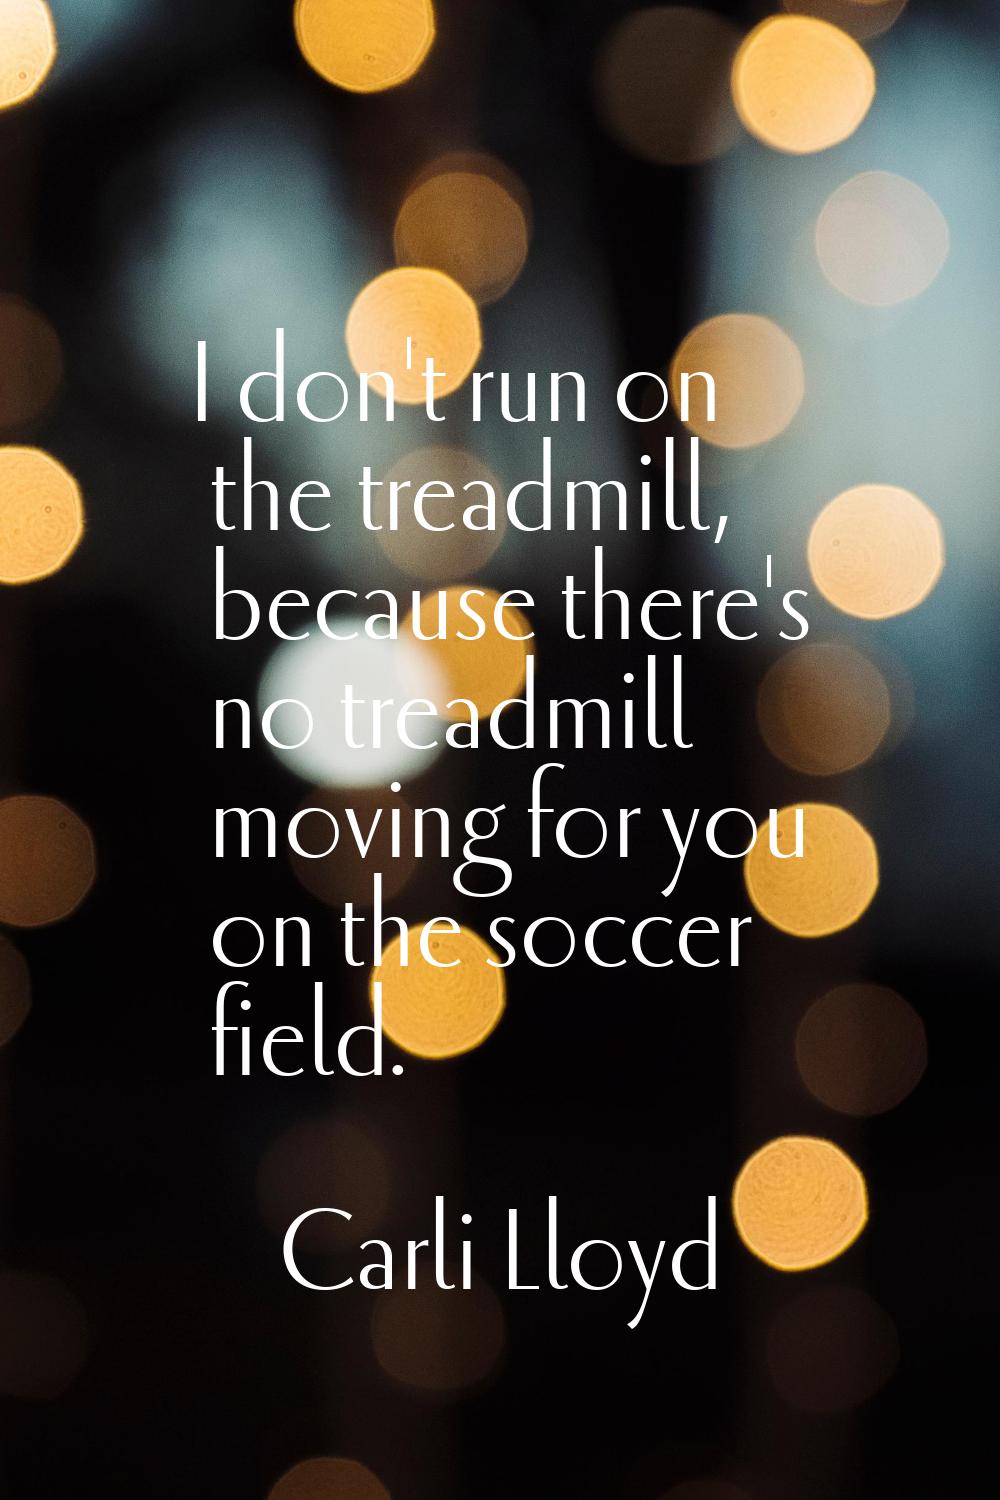 I don't run on the treadmill, because there's no treadmill moving for you on the soccer field.